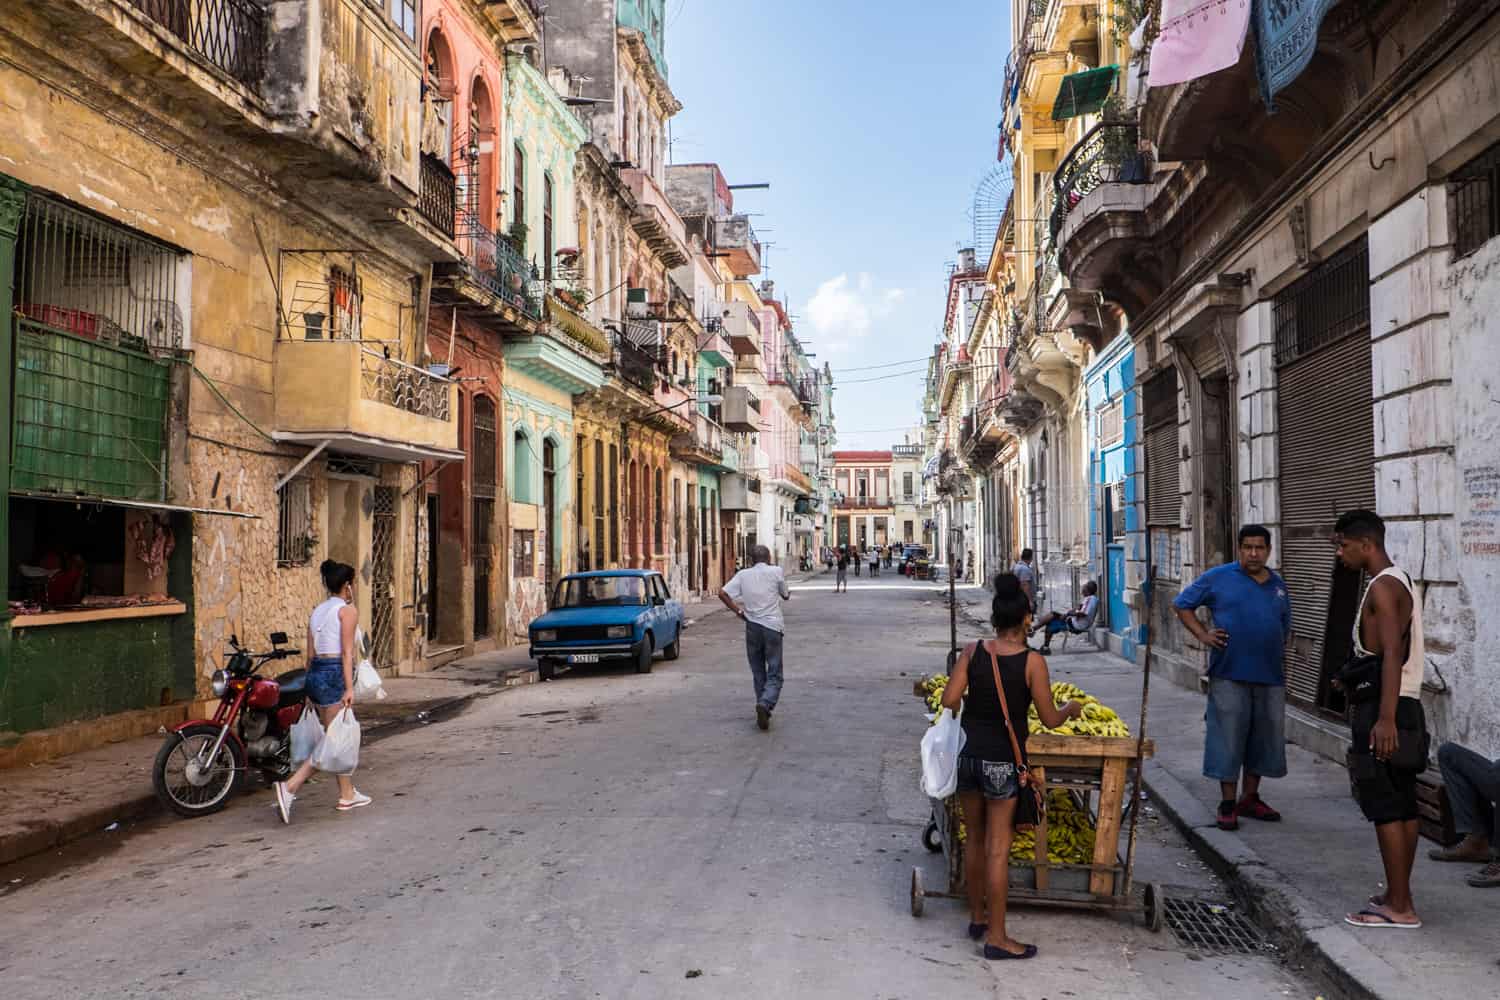 People on a street in Havana, lined with densely packed colourful buildings. 